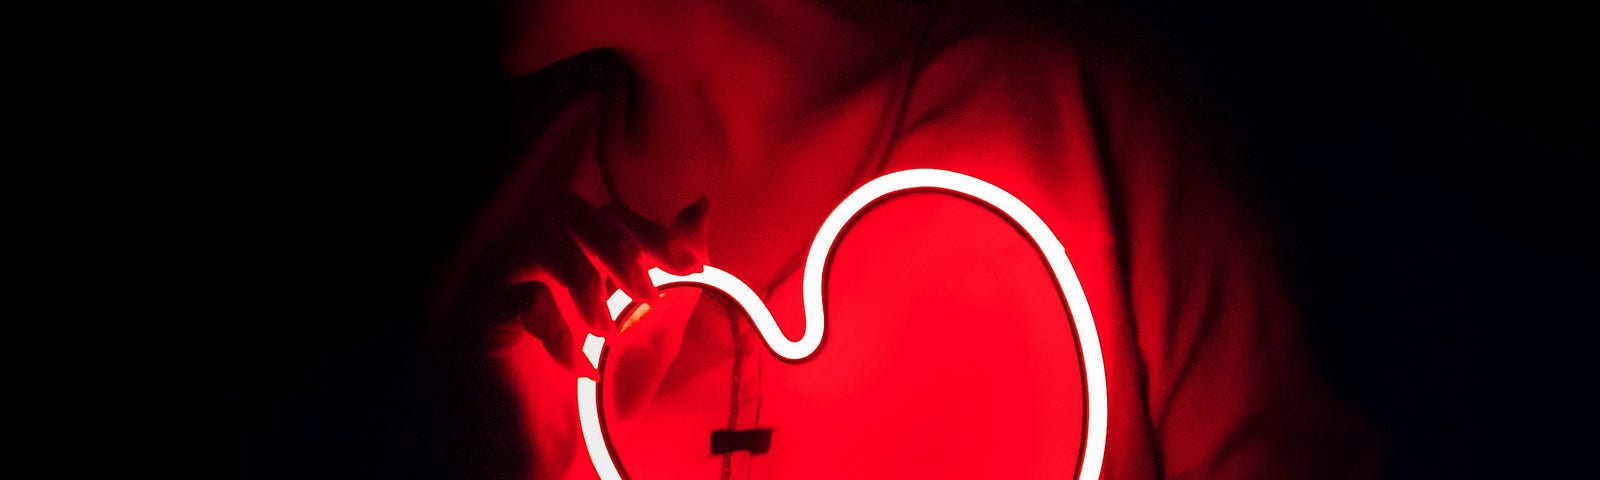 Neon, pink, glowing heart held in front of a woman’s chest against a dark background.